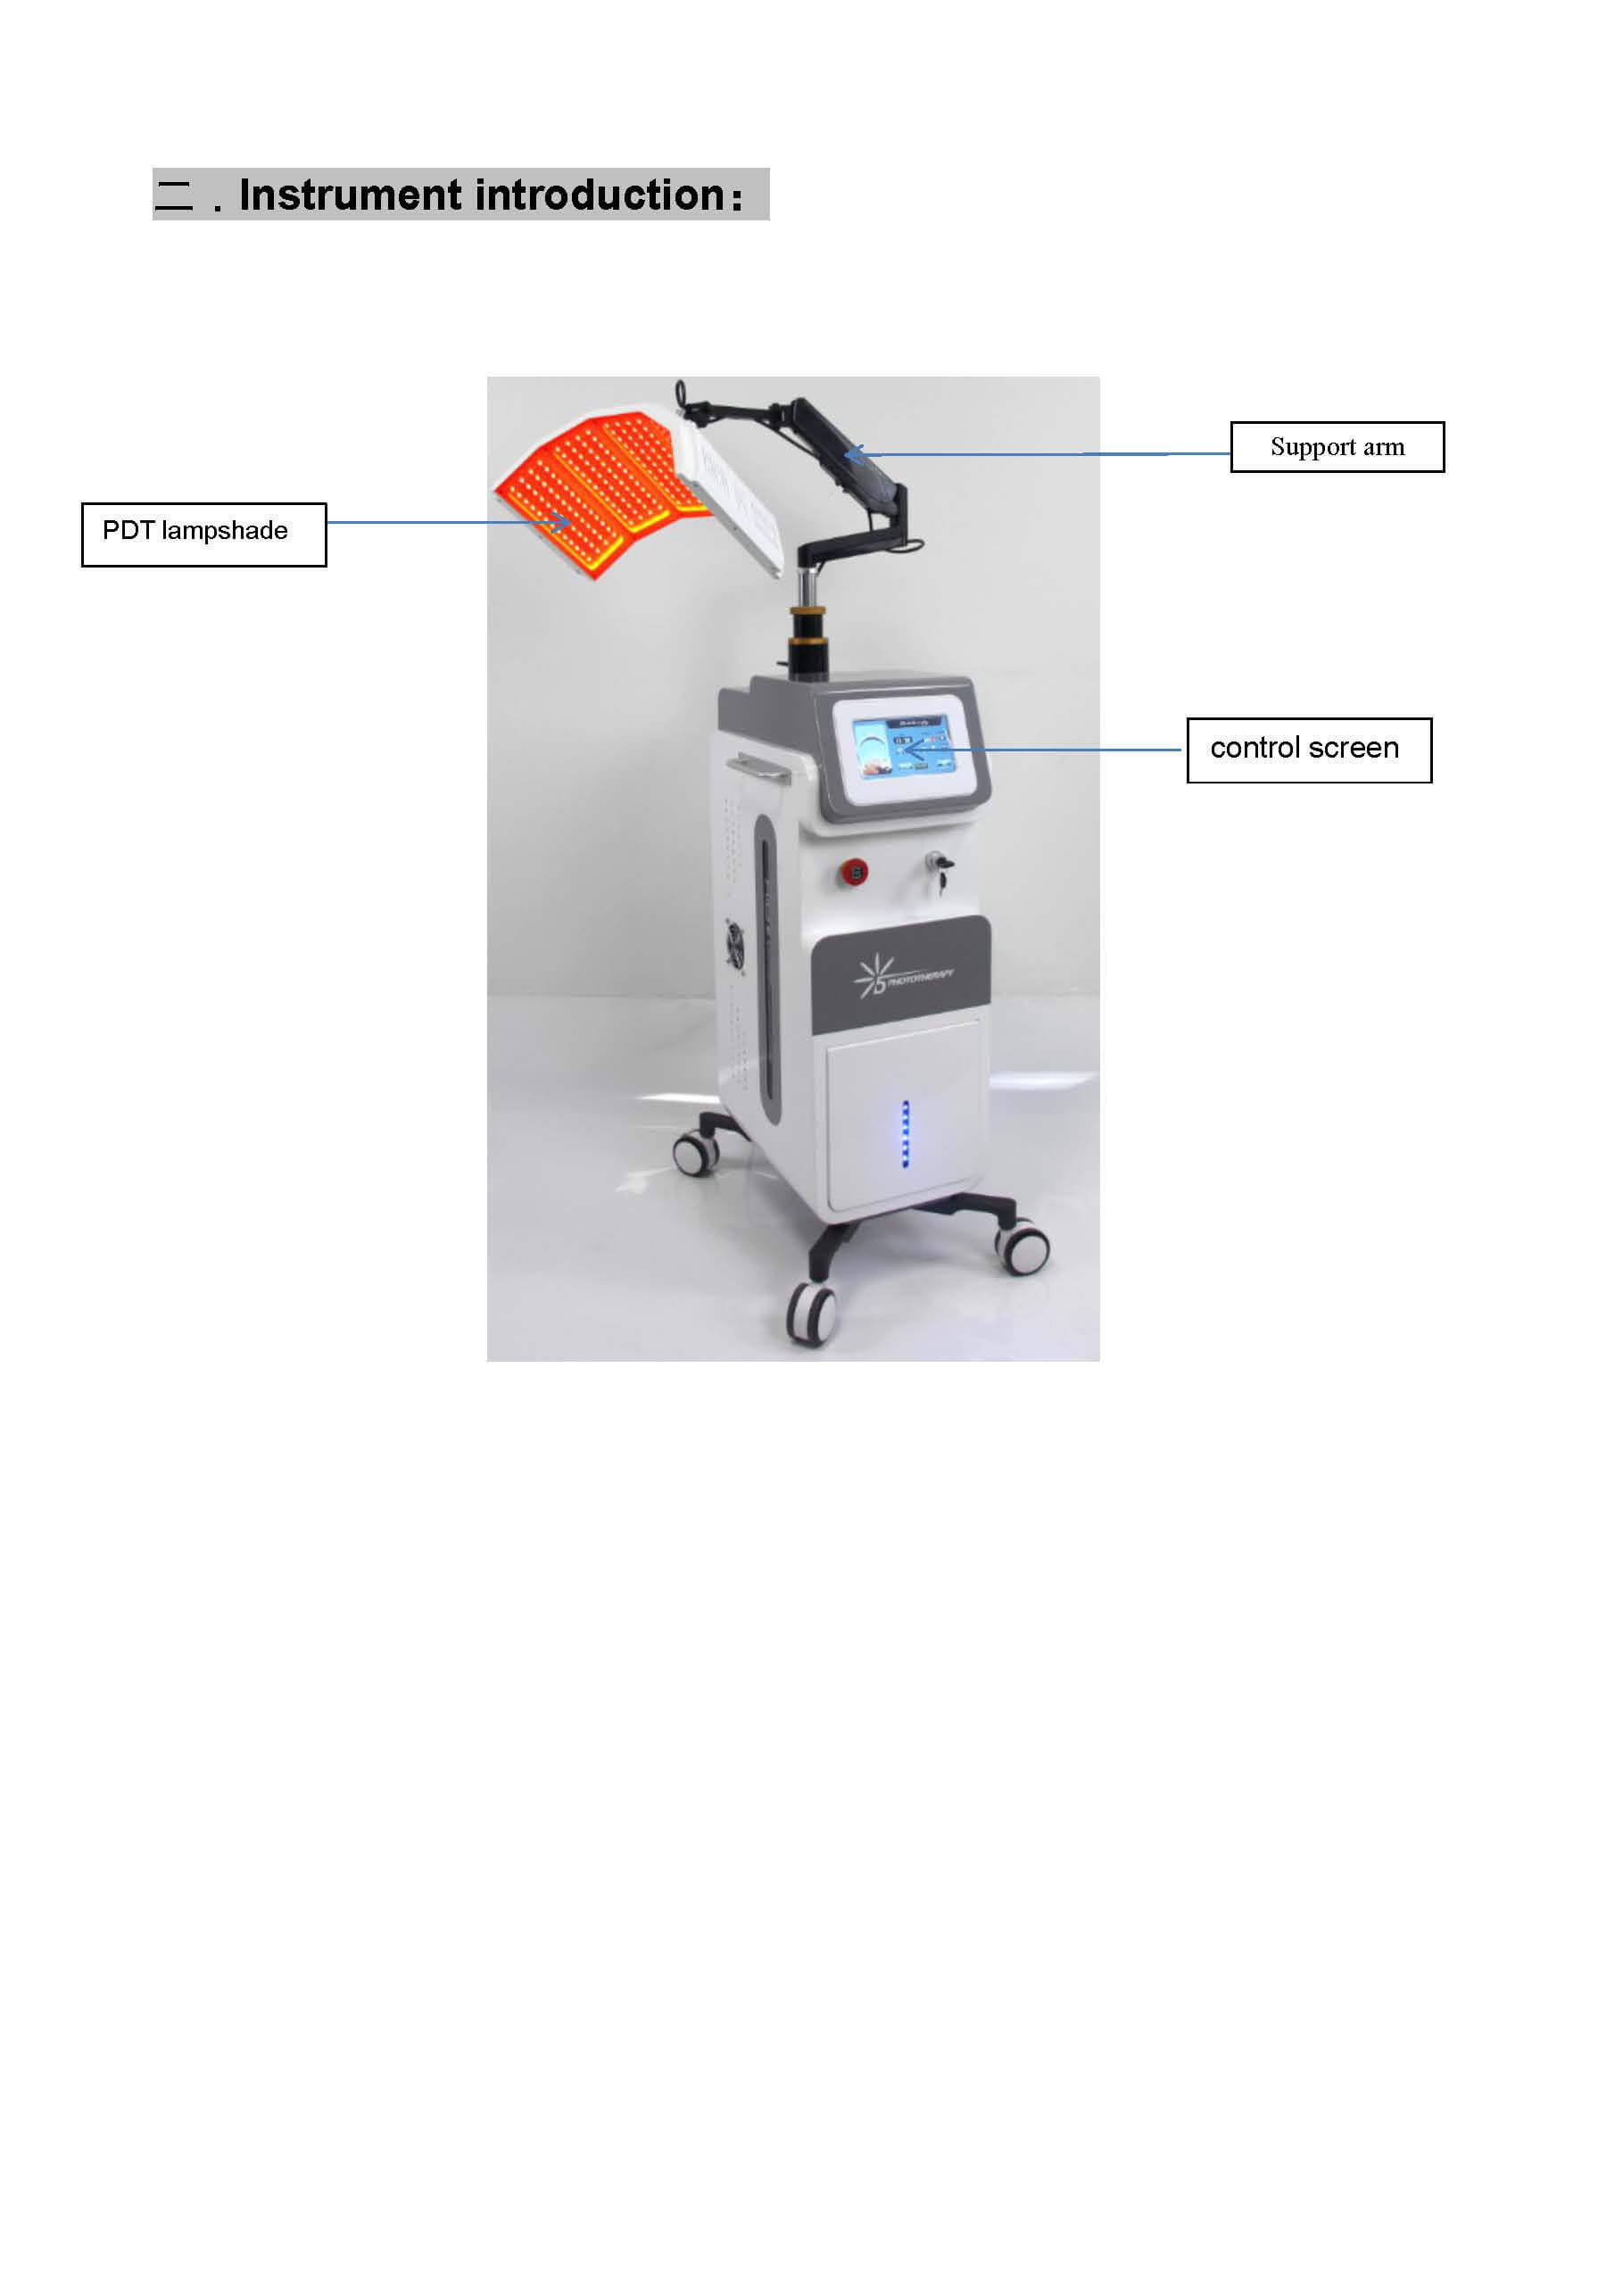 High Energy Vertical PDT Photon Therapy Beauty Machine